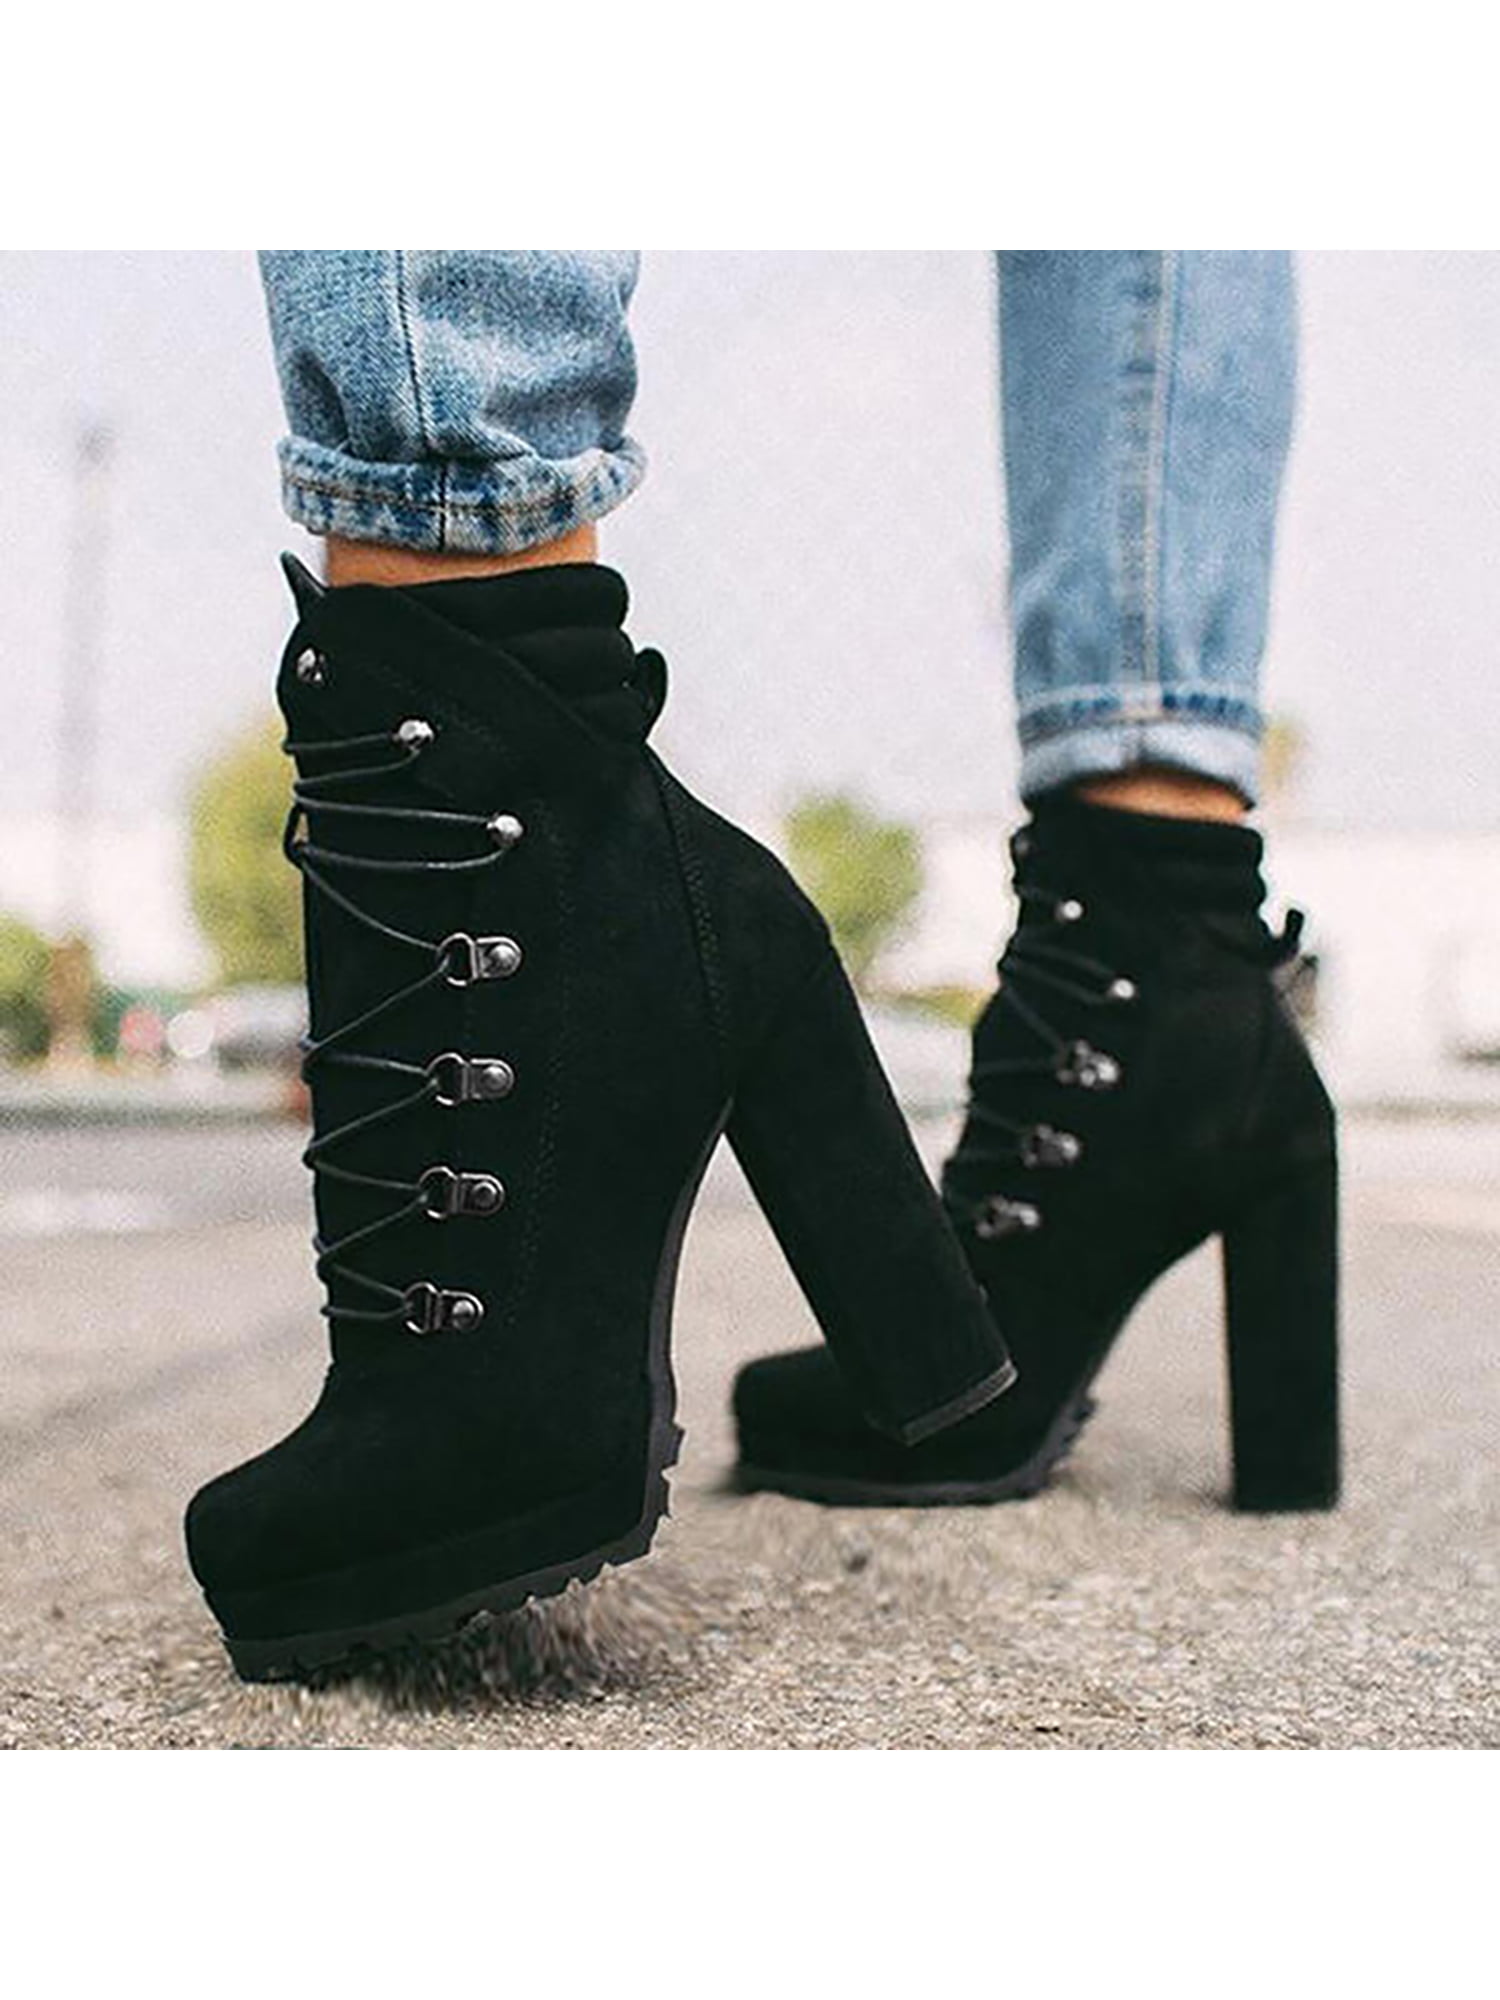 Designer Leather Ankle Boots With Zipper, Lace Up, And Chunky Chunky Heel  Bootss 6cm Chunky Heel Boots Height Perfect For Dressy Occasions And  Parties From Bigbosschen, $111.3 | DHgate.Com